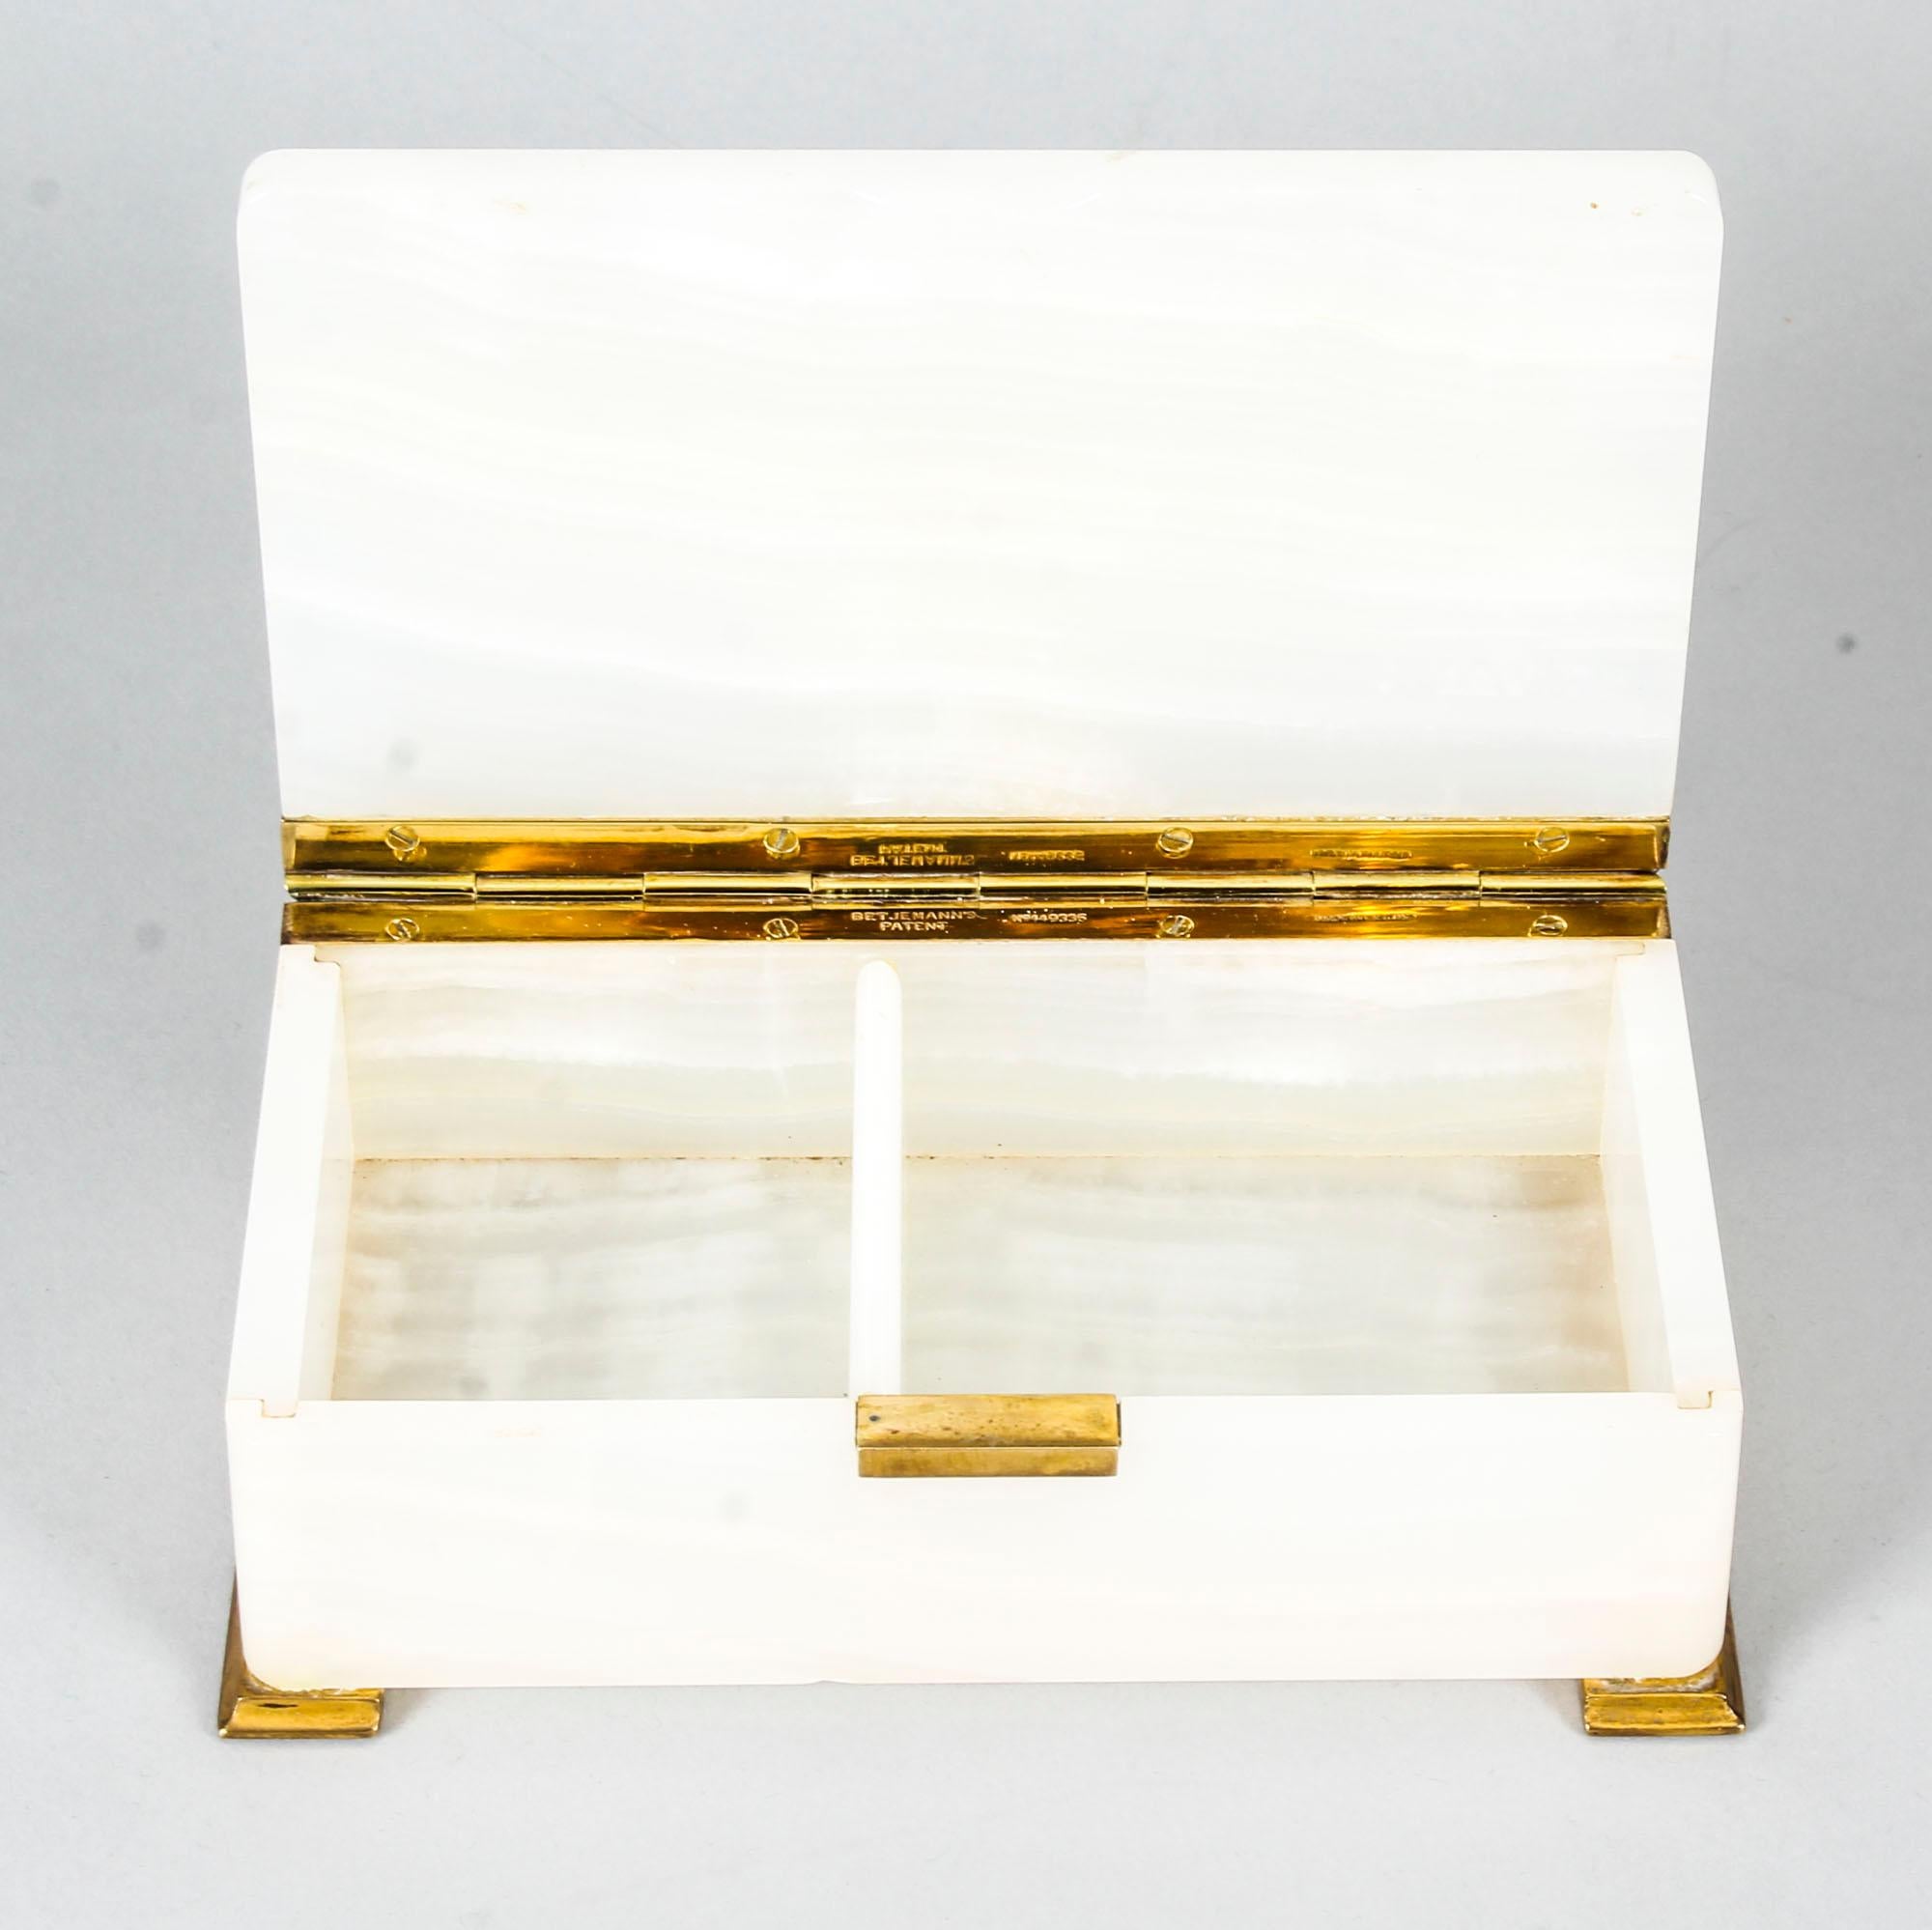 Early 20th Century Antique Art Deco Alabaster and Brass Card Box Jewelry Casket by Betjemann, 1920